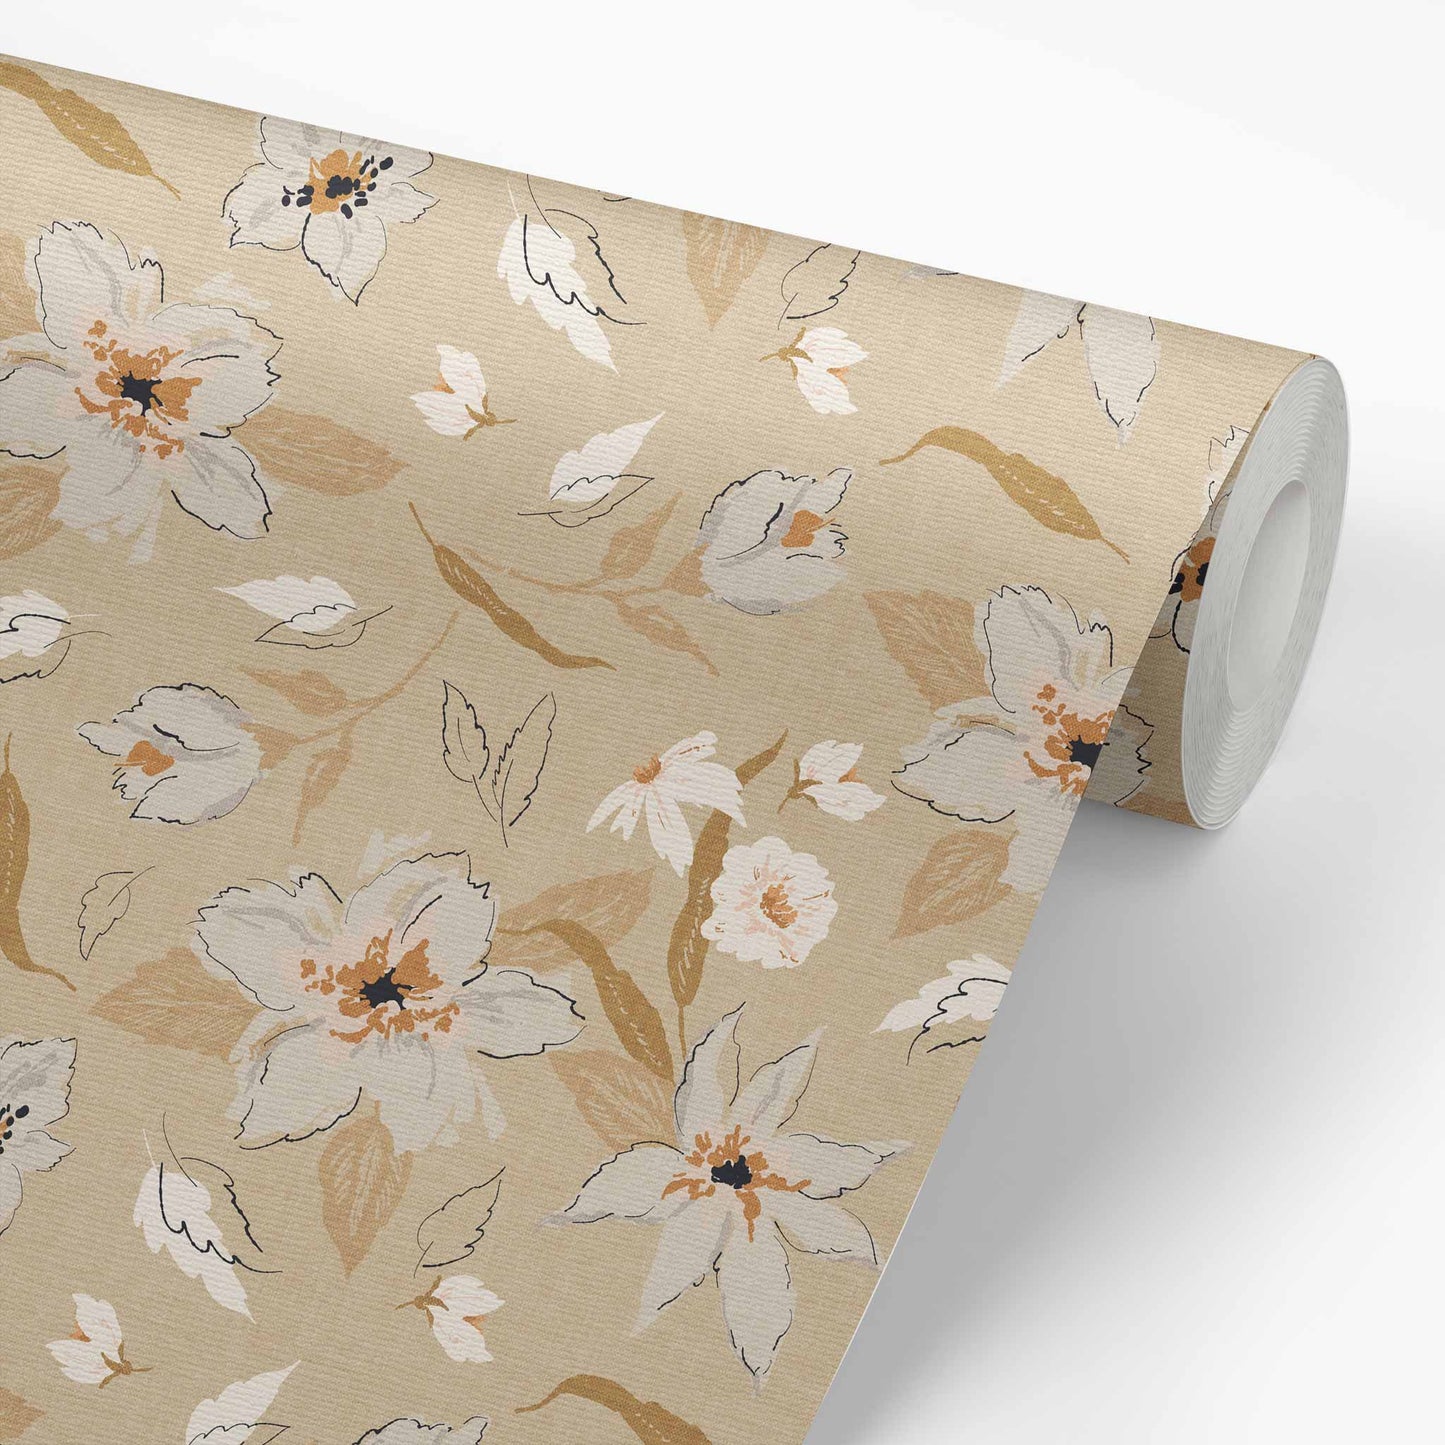 Bring a splash of natural beauty to your walls with this stunning Freehand Florals Wallpaper. Its vibrant tan tones and gorgeously done flowers will turn your walls into a literal work of art.